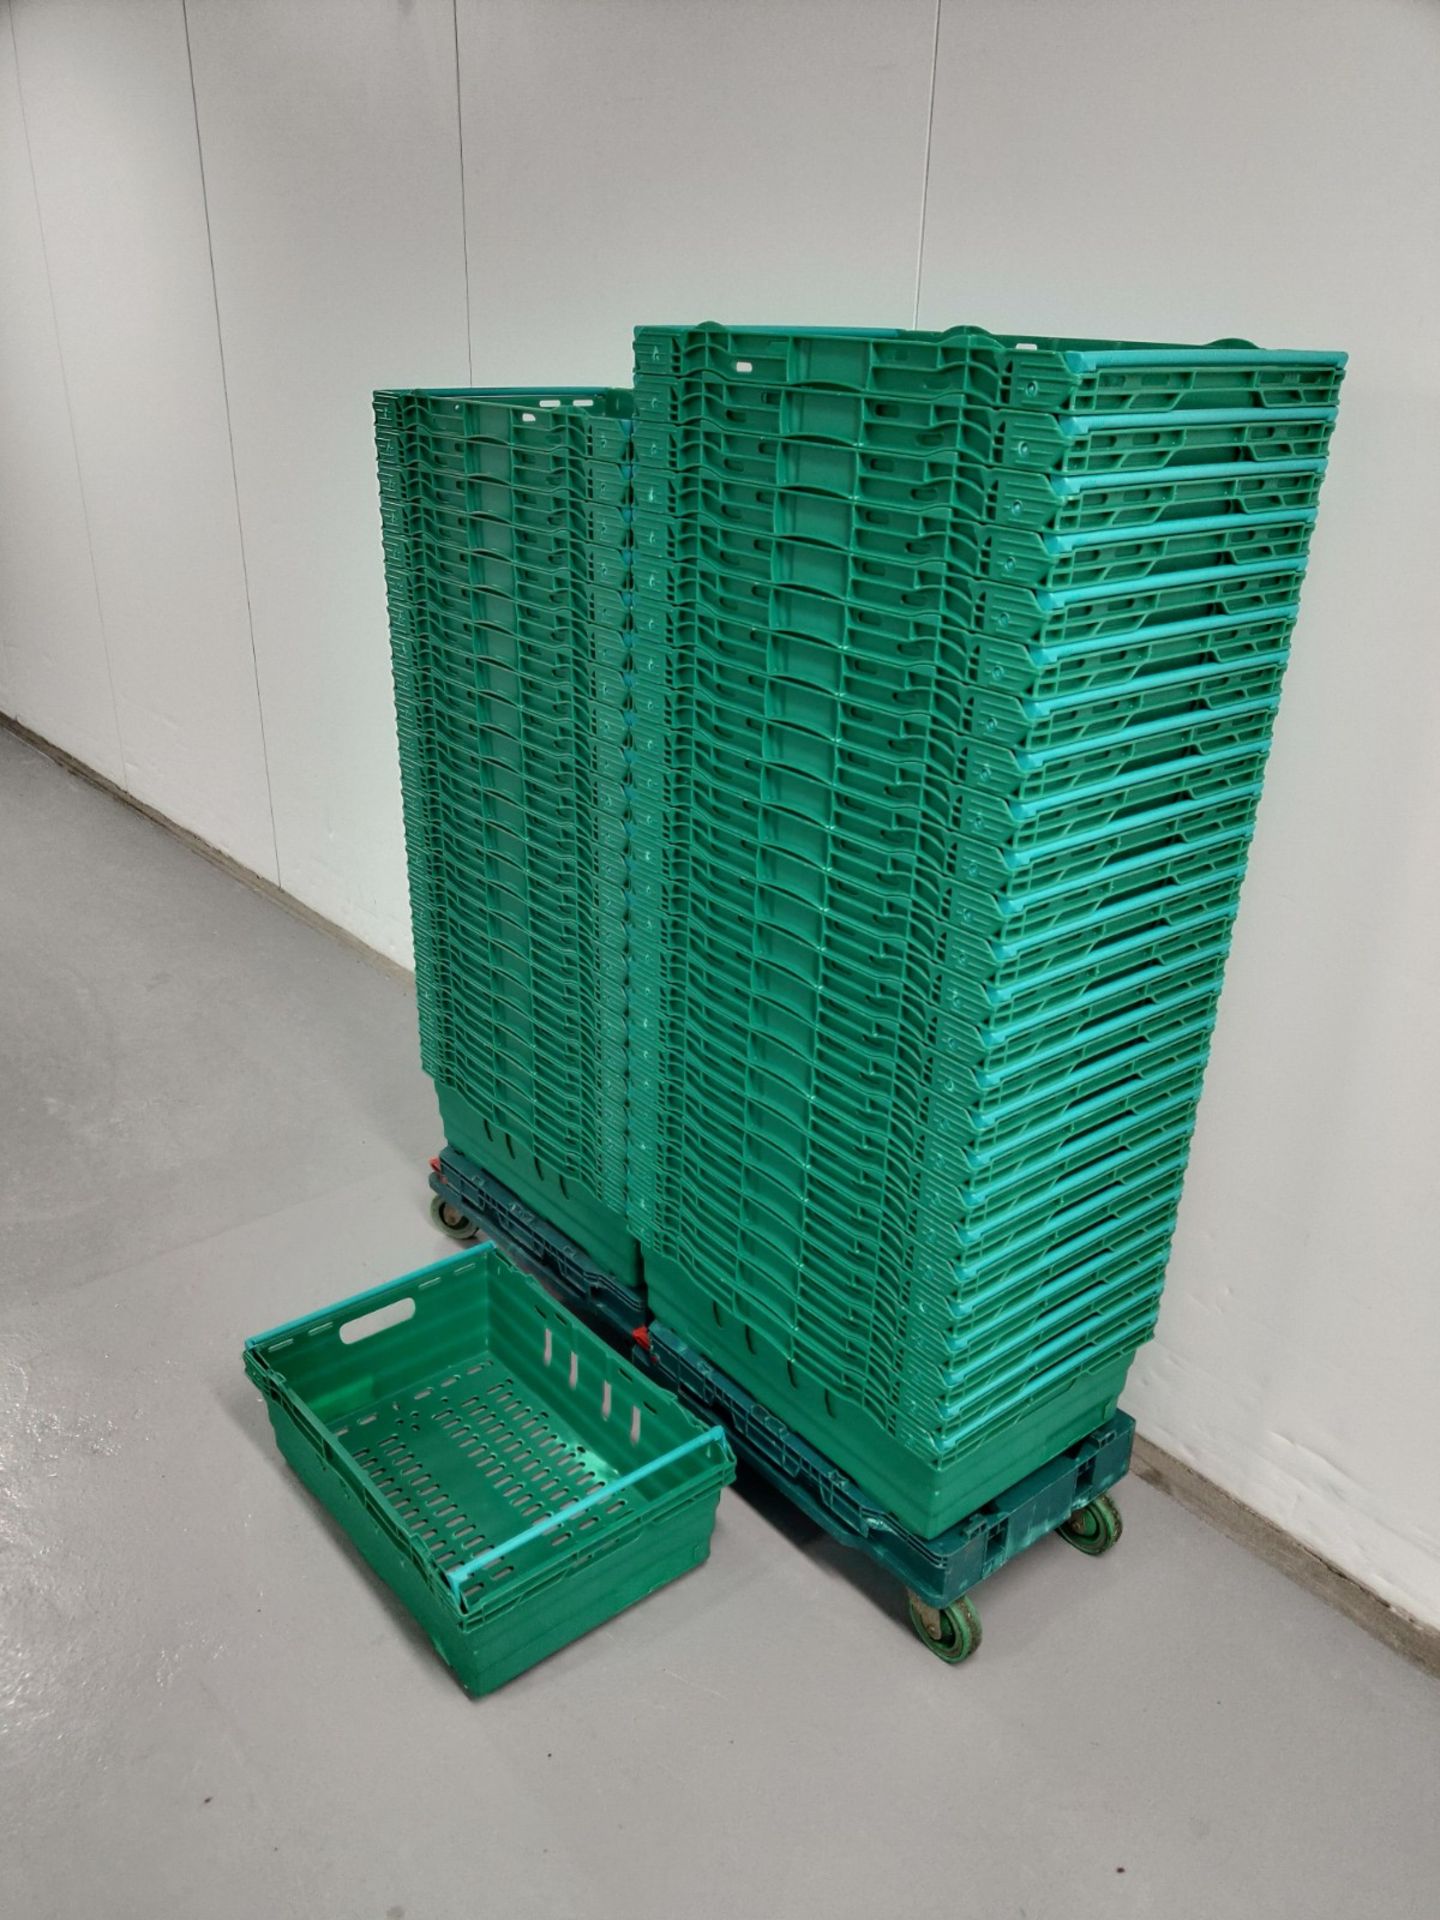 Tote Box Ventilated Supermarket Crate - Image 3 of 3